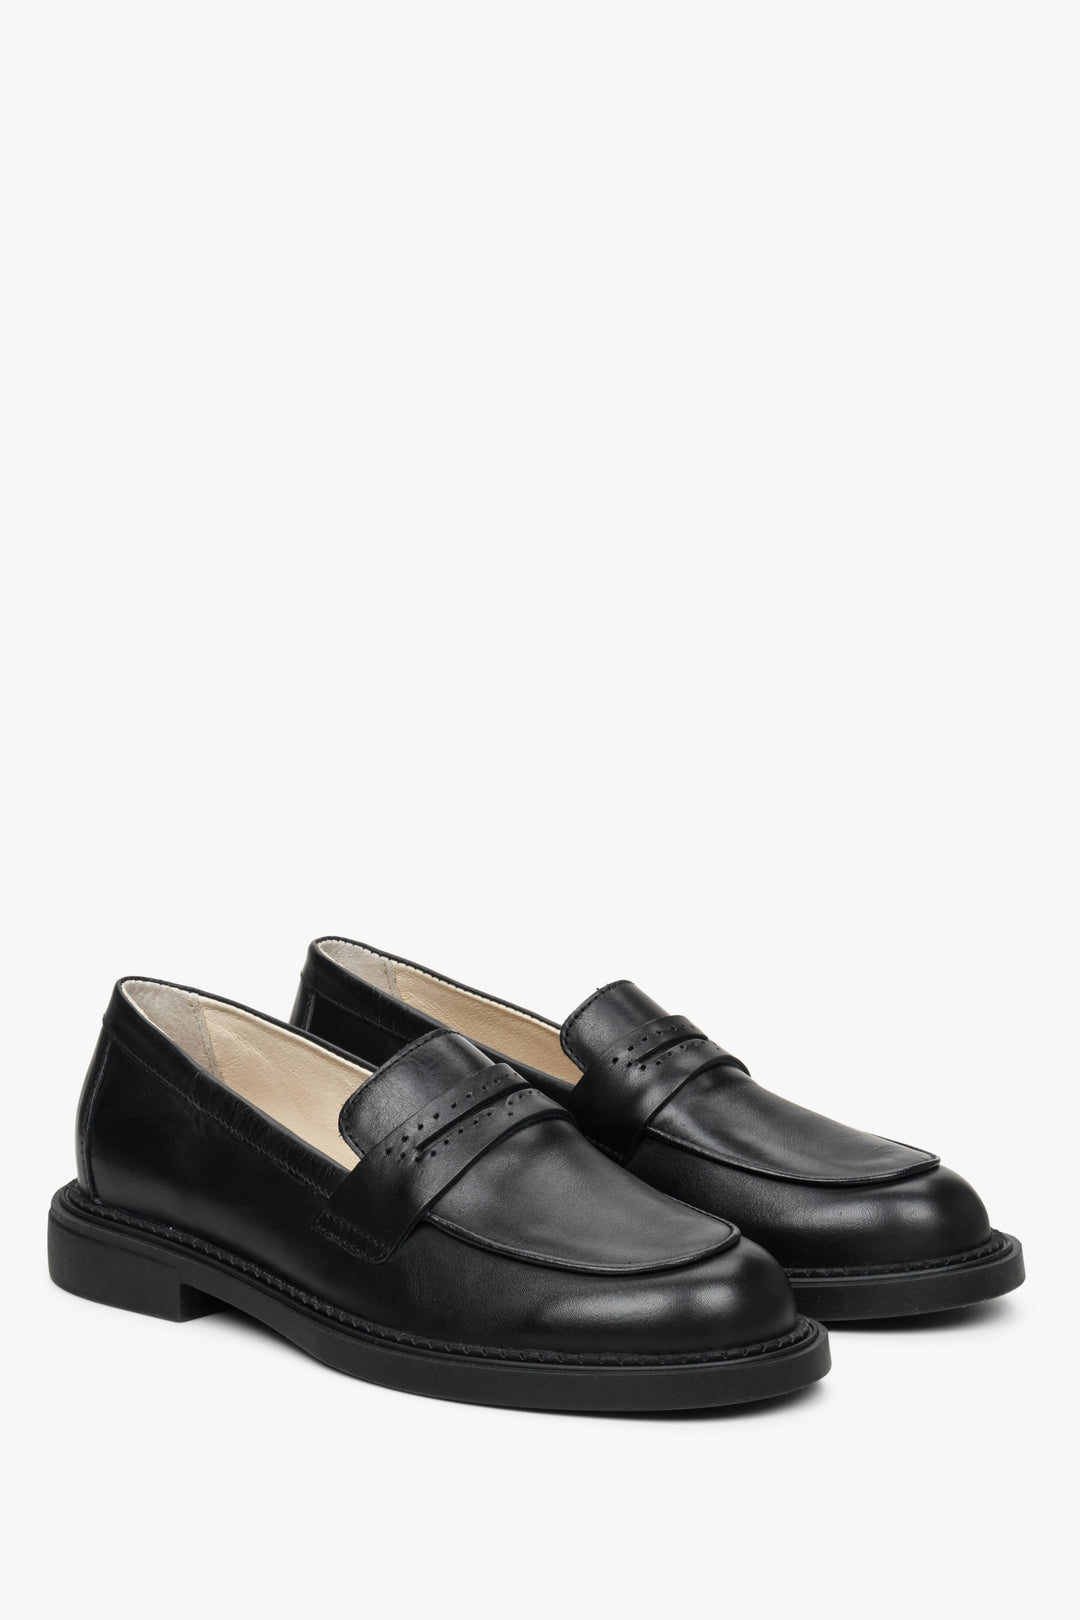 Women's black leather loafers for spring Estro.